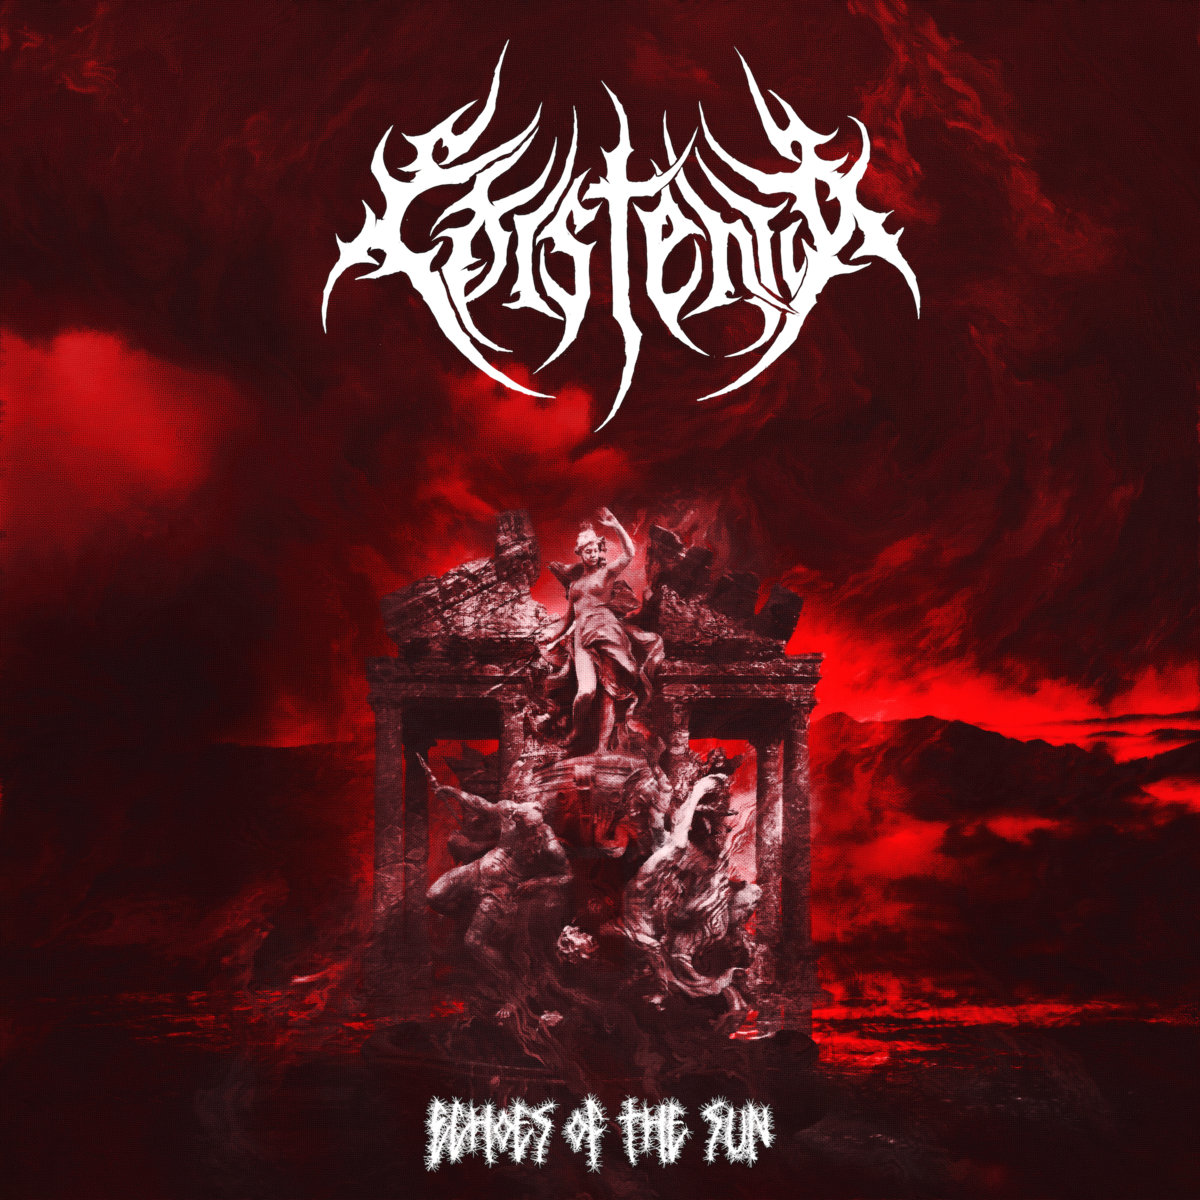 LISTEN: “Echoes of the Sun” by Existentia